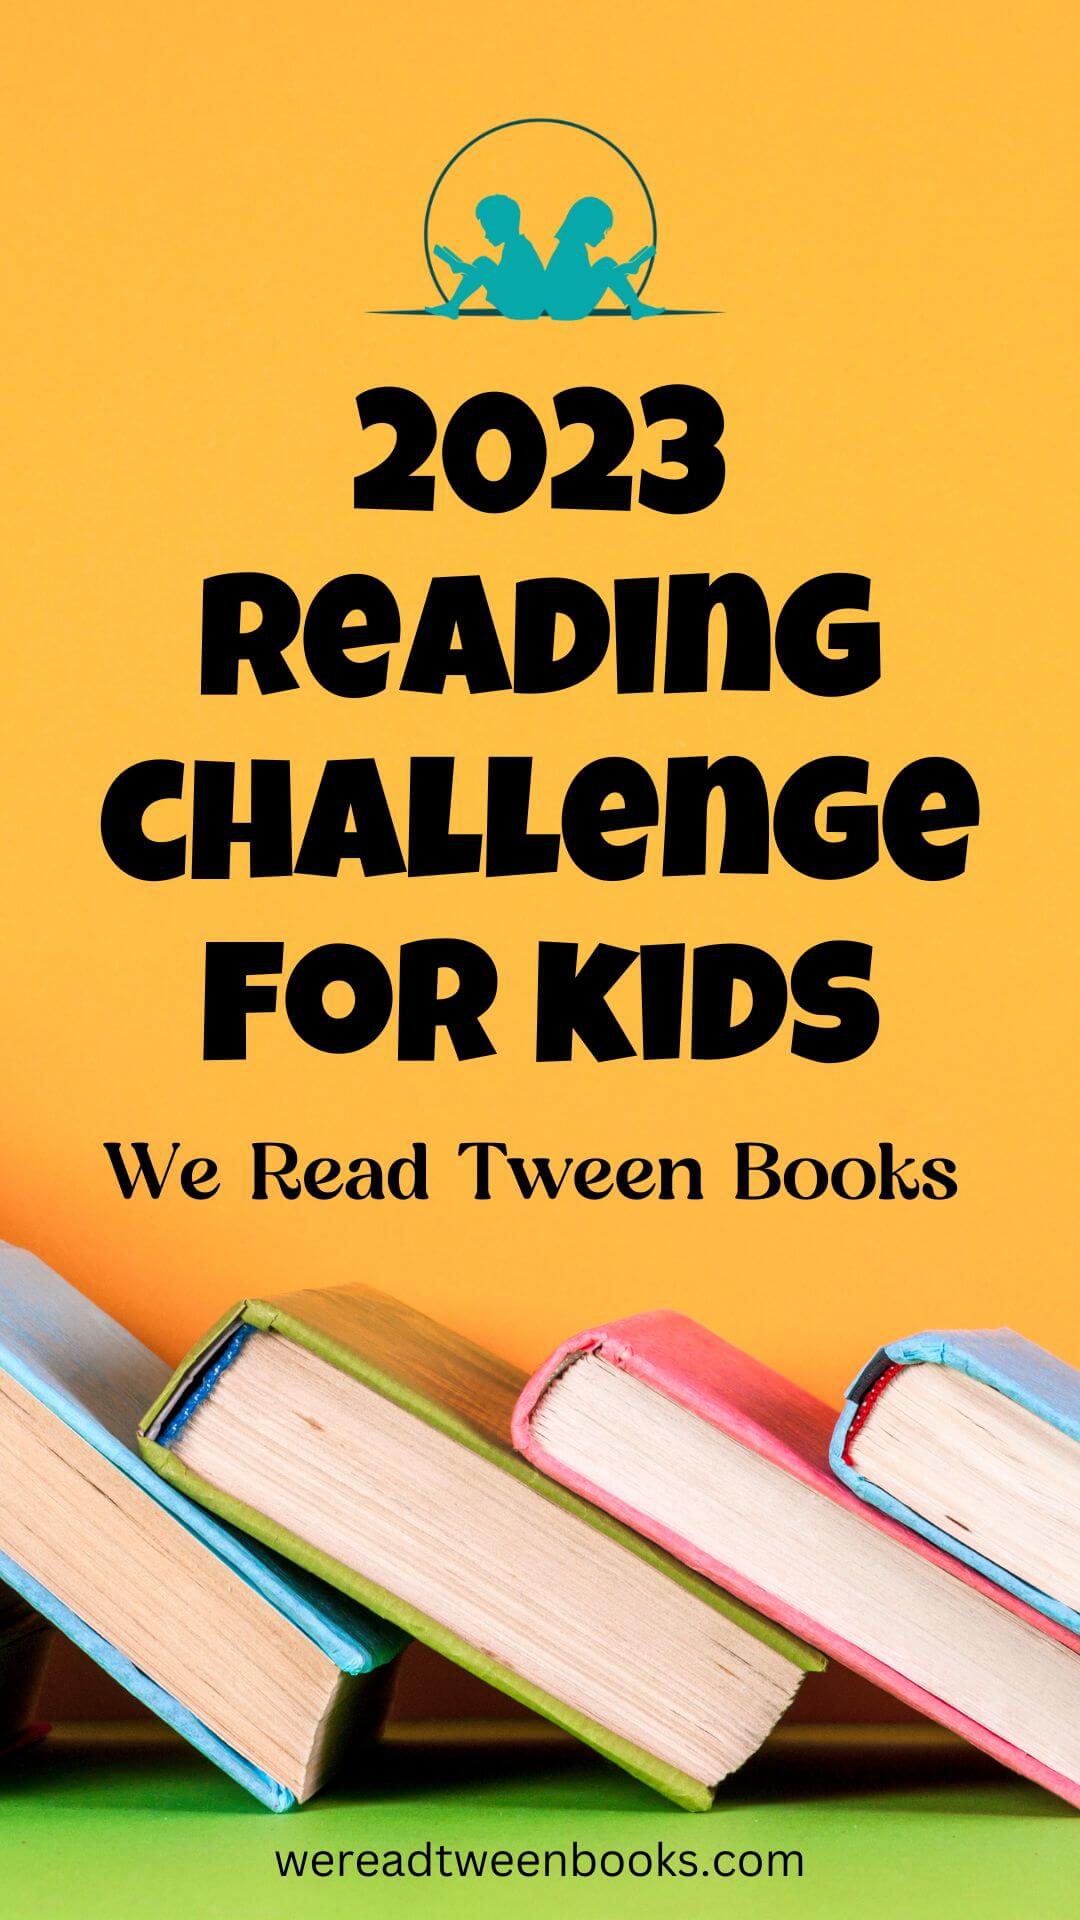 Join the 2023 Reading Challenge for Kids with book bloggers, We Read Tween Books.